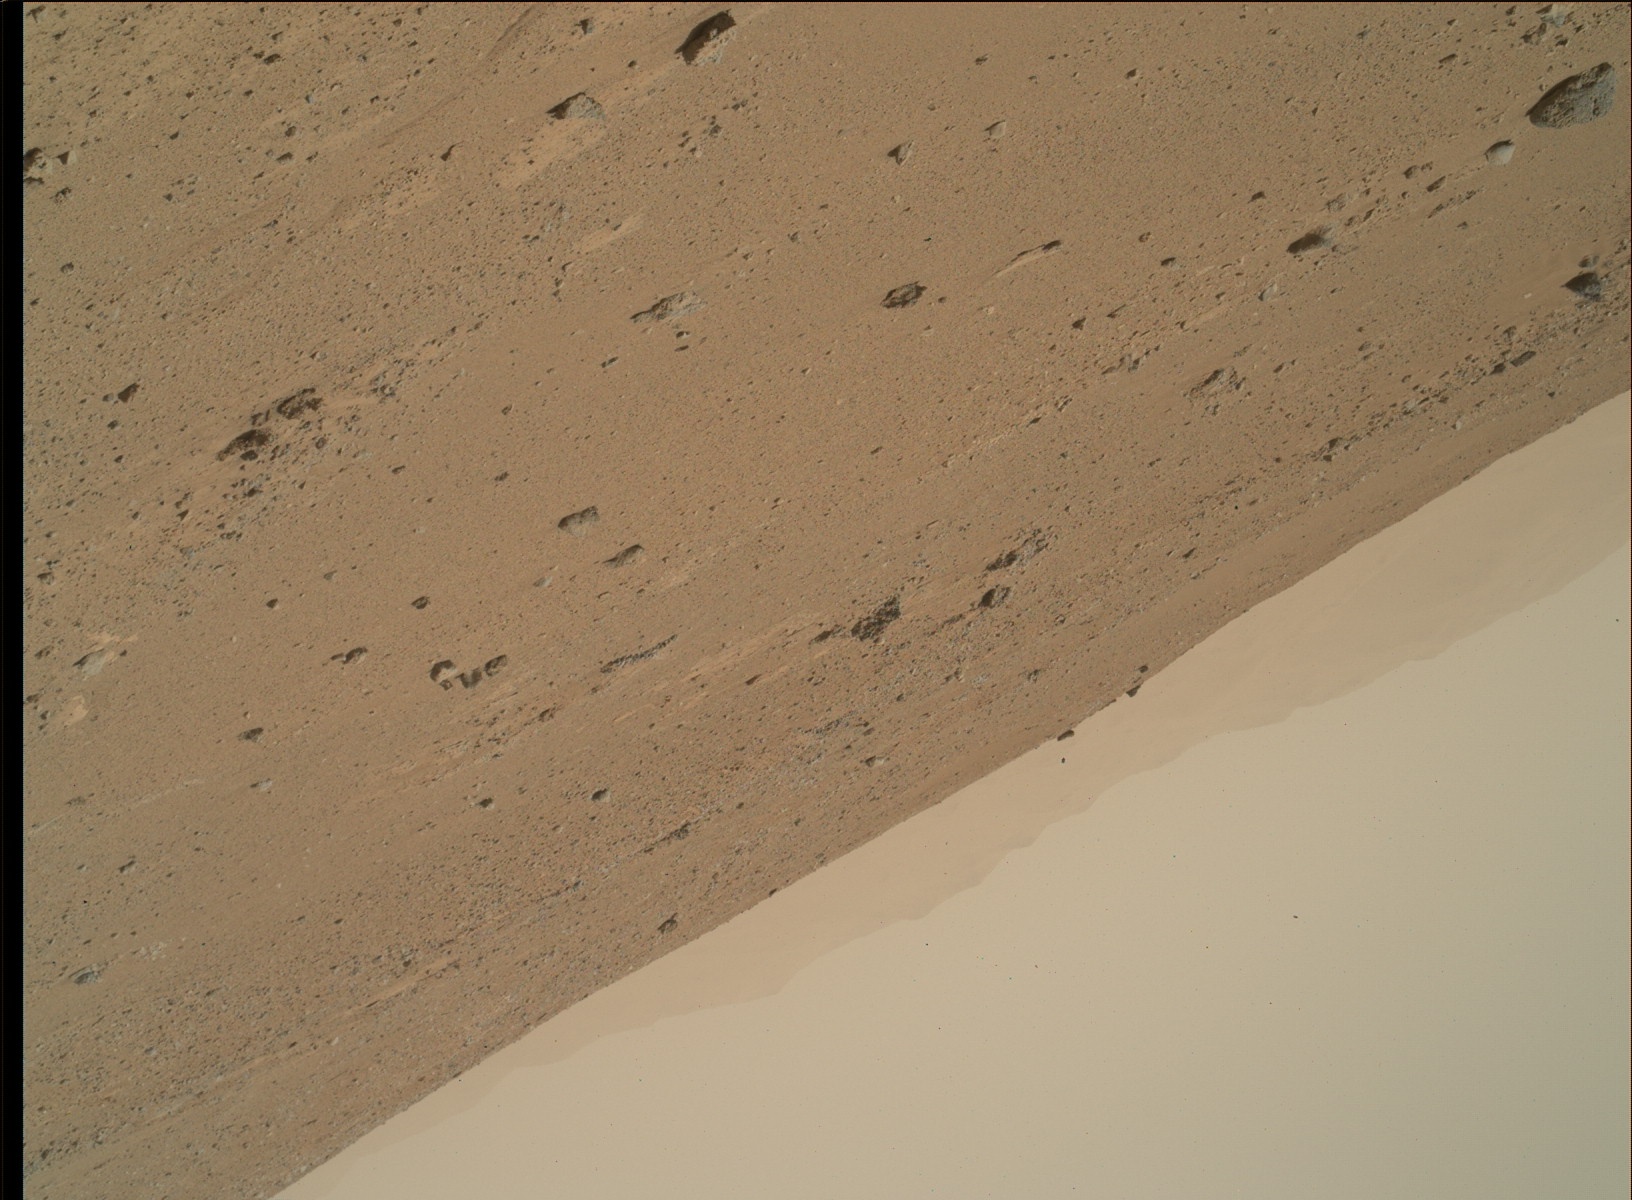 Nasa's Mars rover Curiosity acquired this image using its Mars Hand Lens Imager (MAHLI) on Sol 392